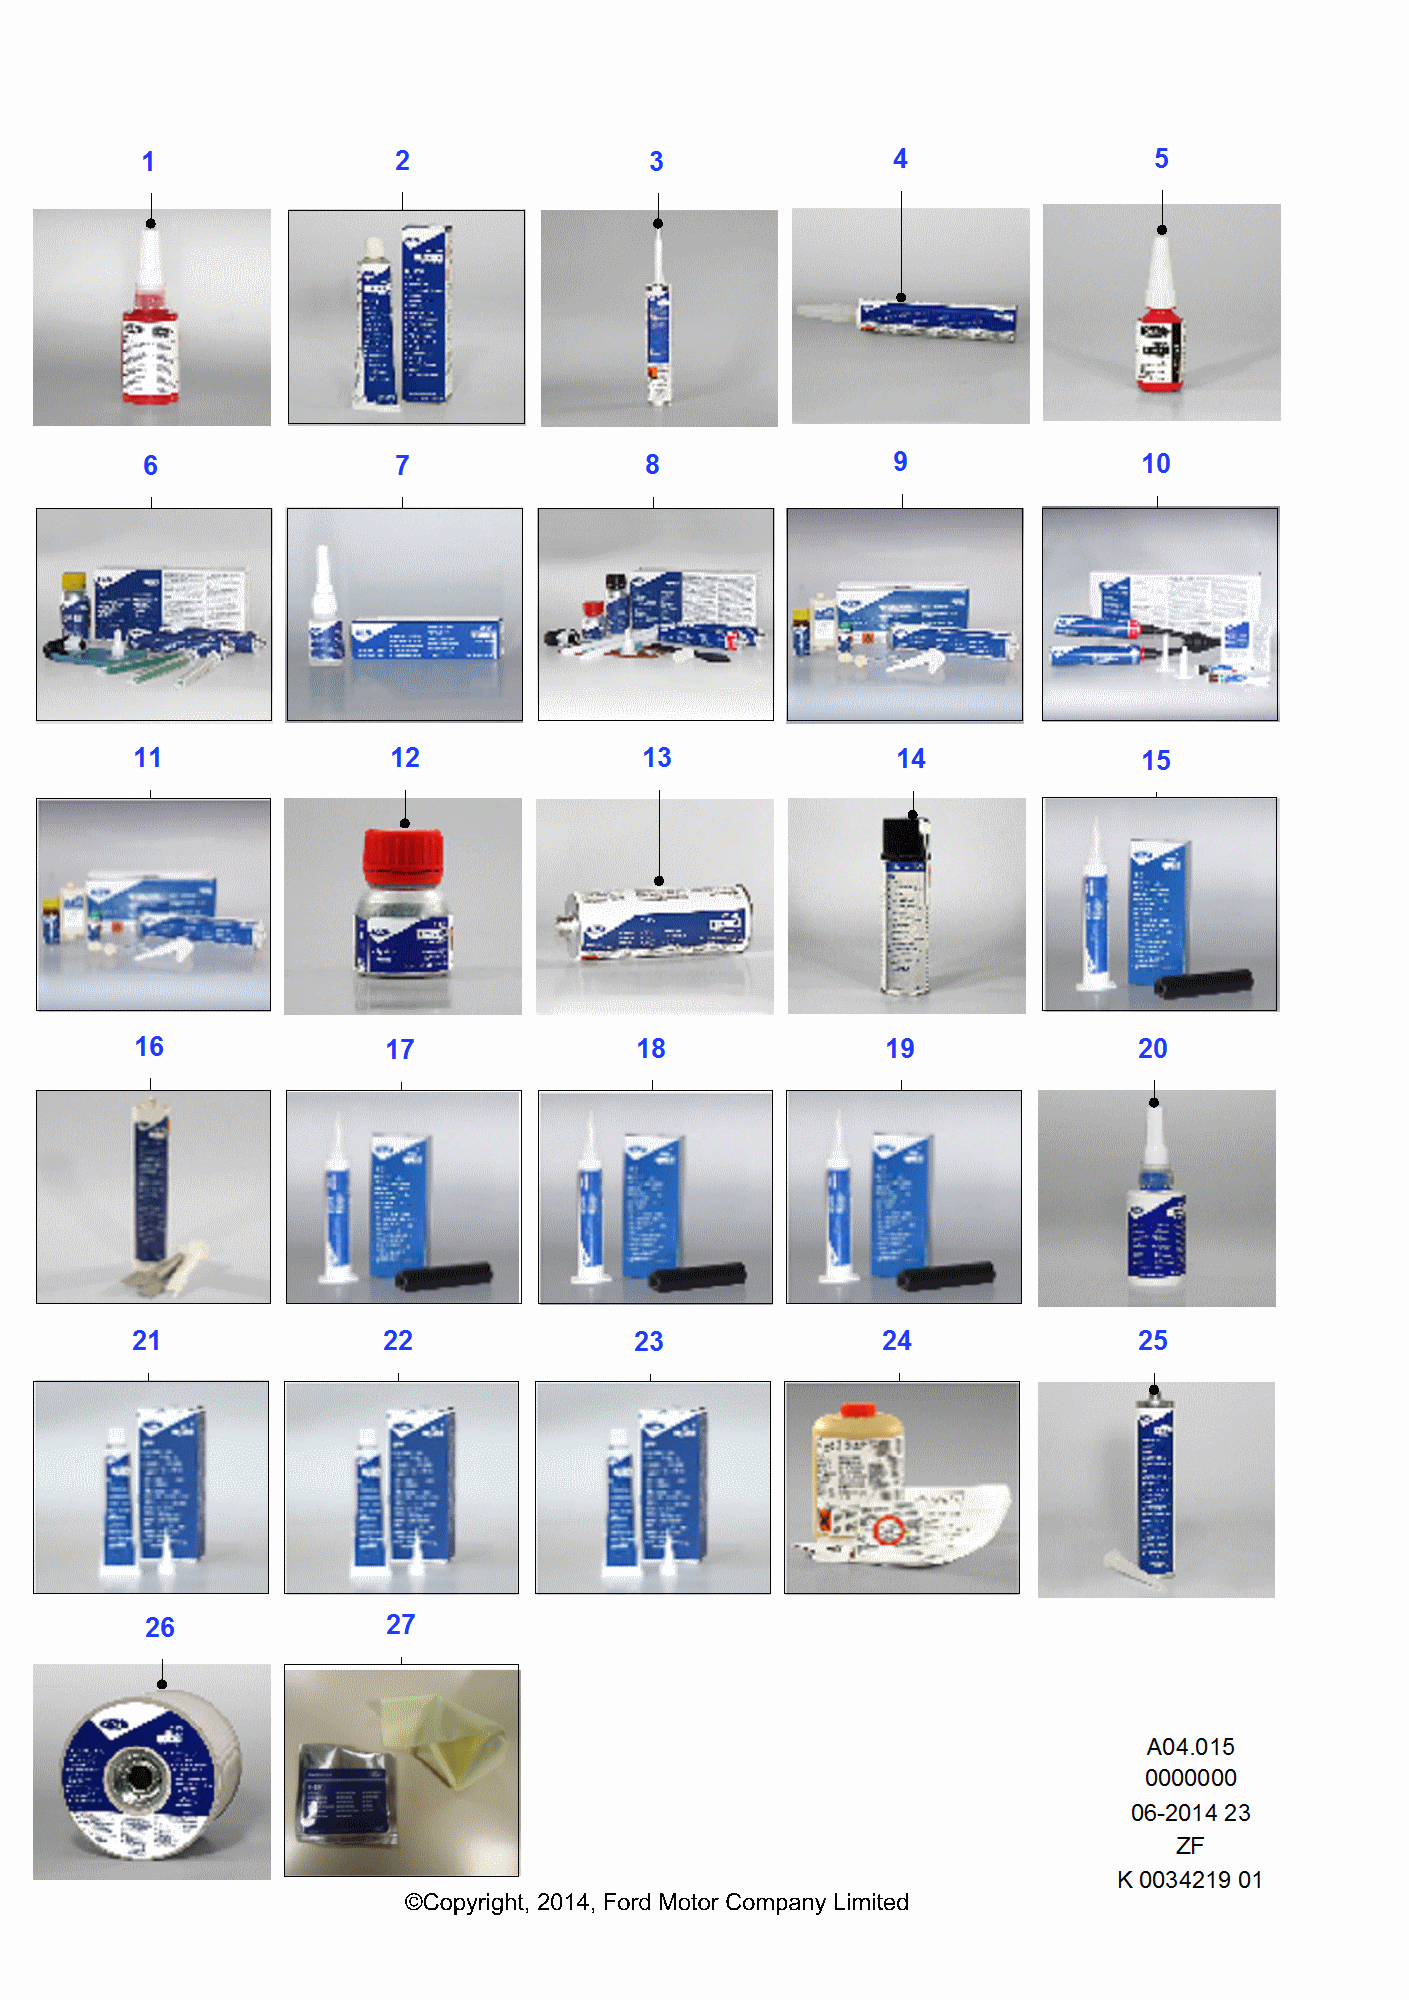 Sealing Compounds And Adhesives pentru Ford Fiesta Fiesta 1989-1996               (CX)